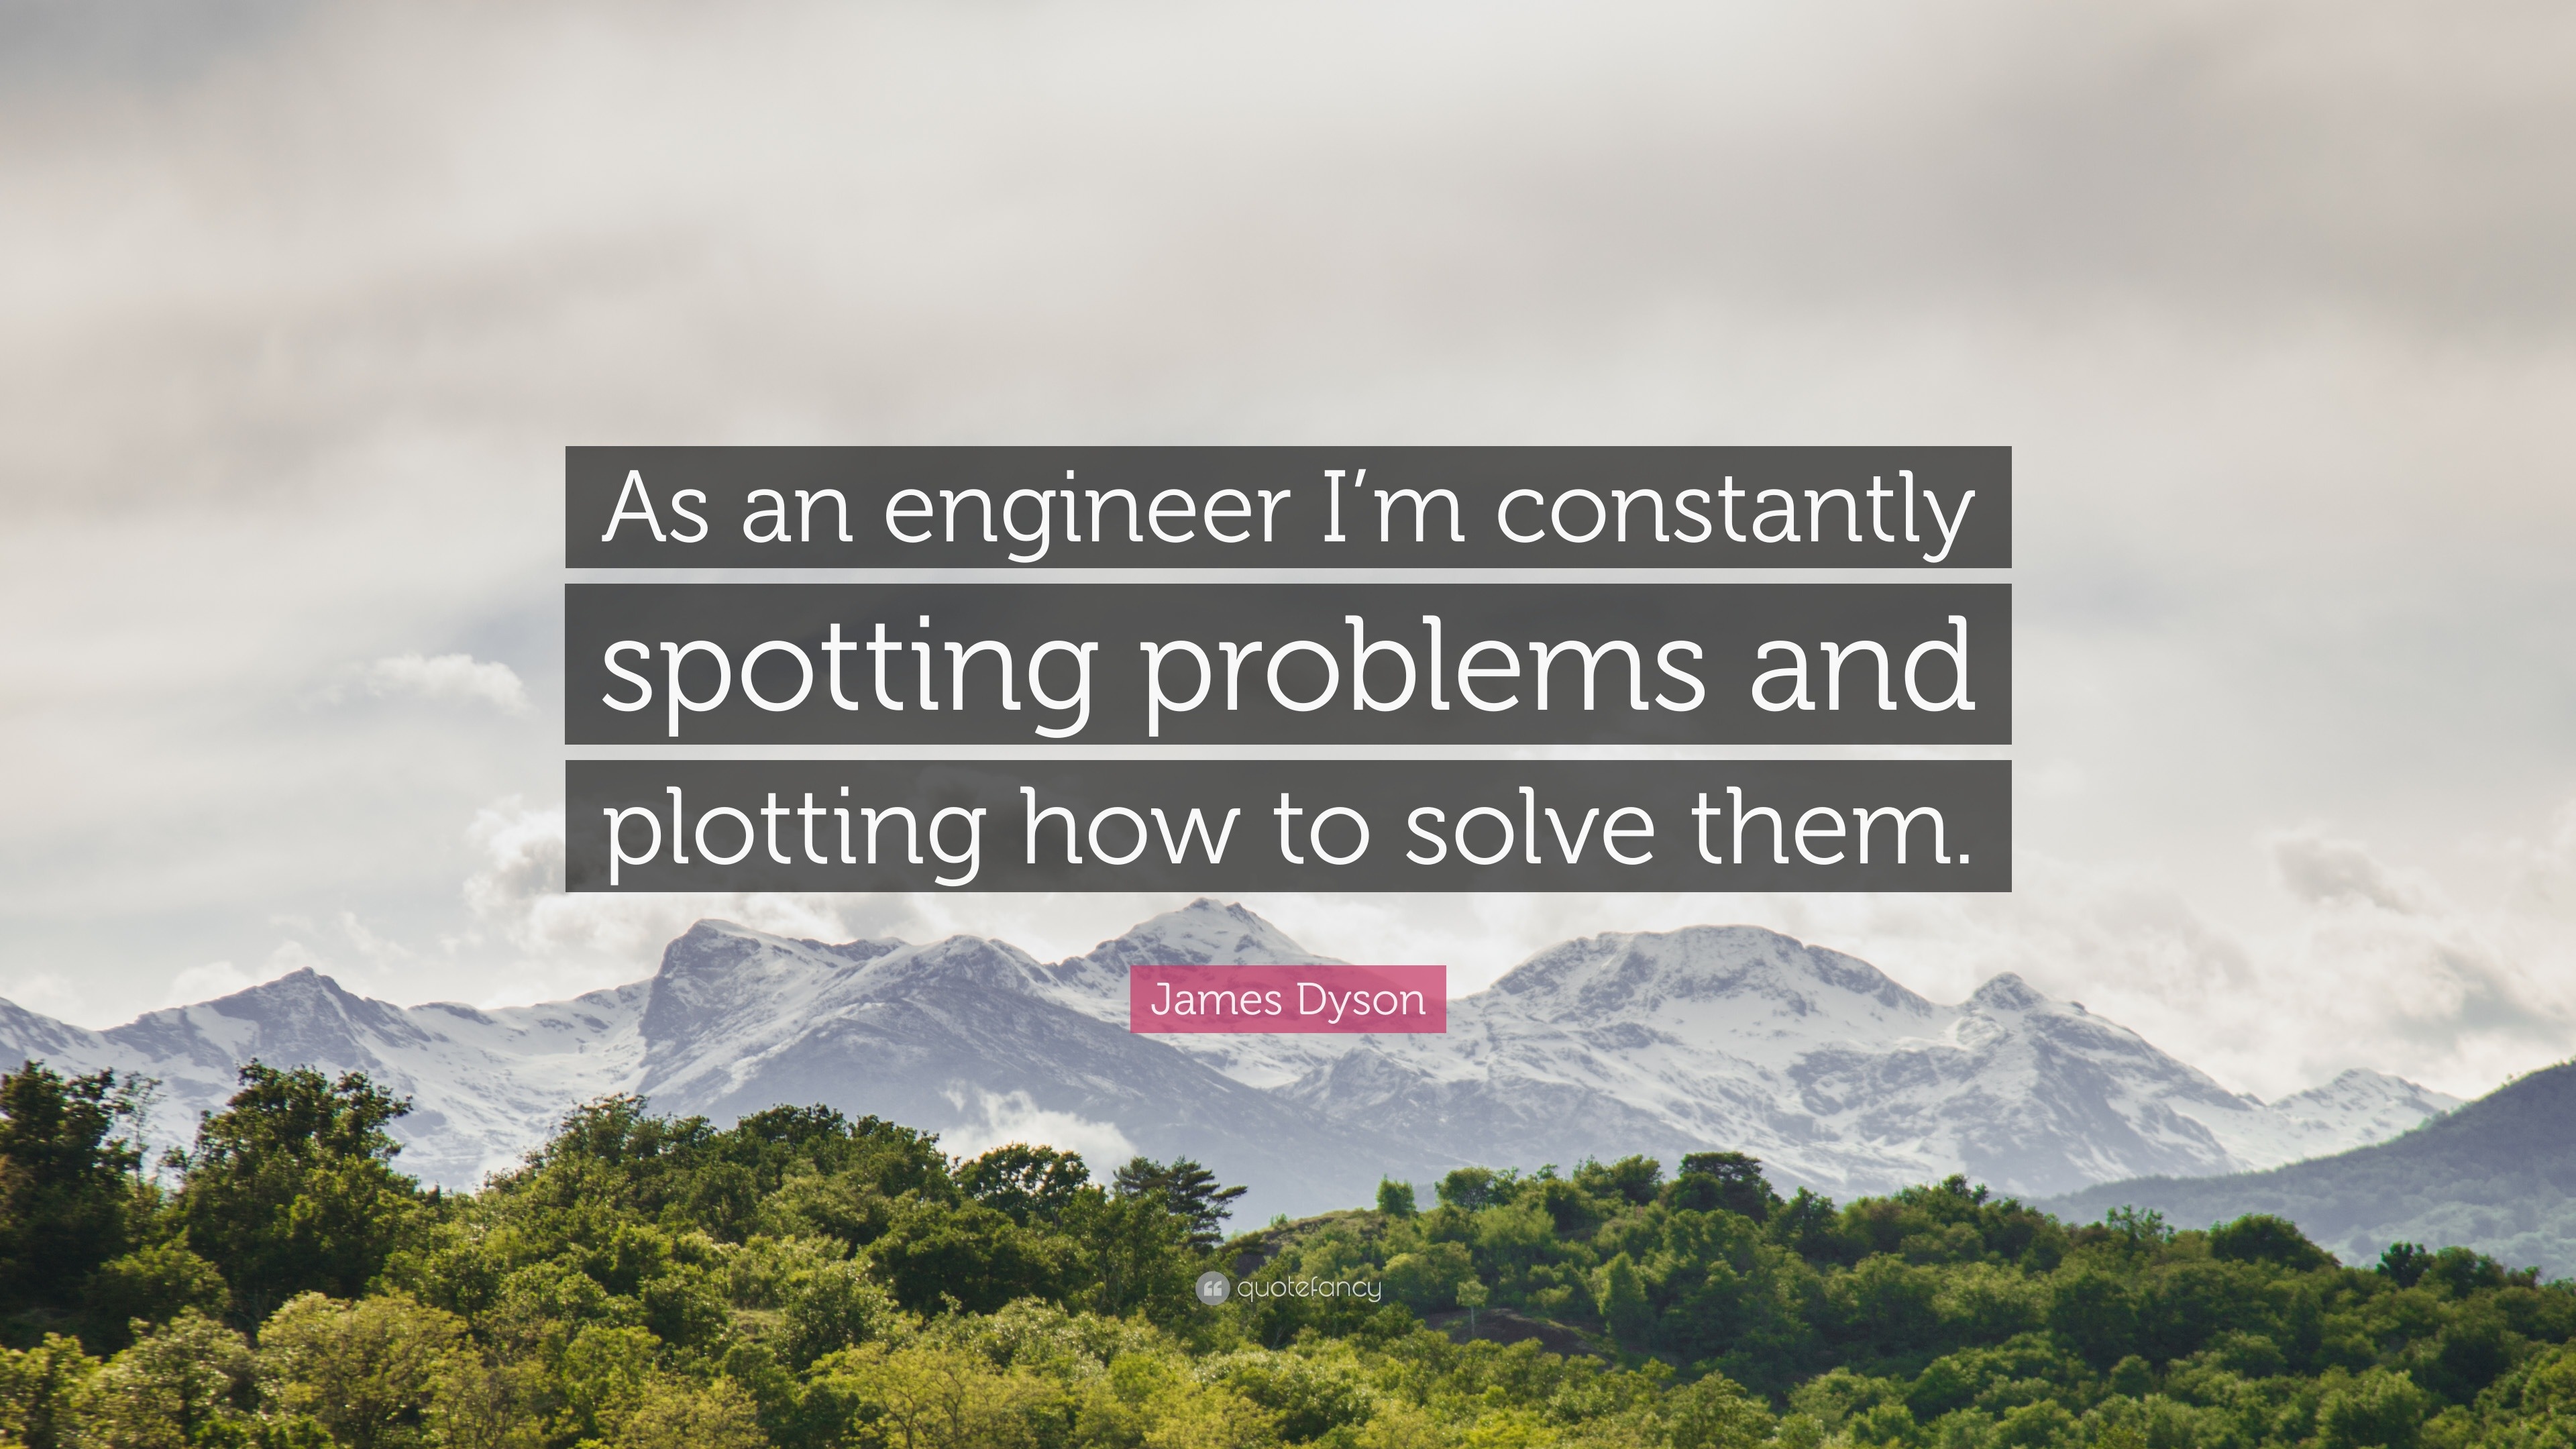 https://quotefancy.com/media/wallpaper/3840x2160/905515-James-Dyson-Quote-As-an-engineer-I-m-constantly-spotting-problems.jpg